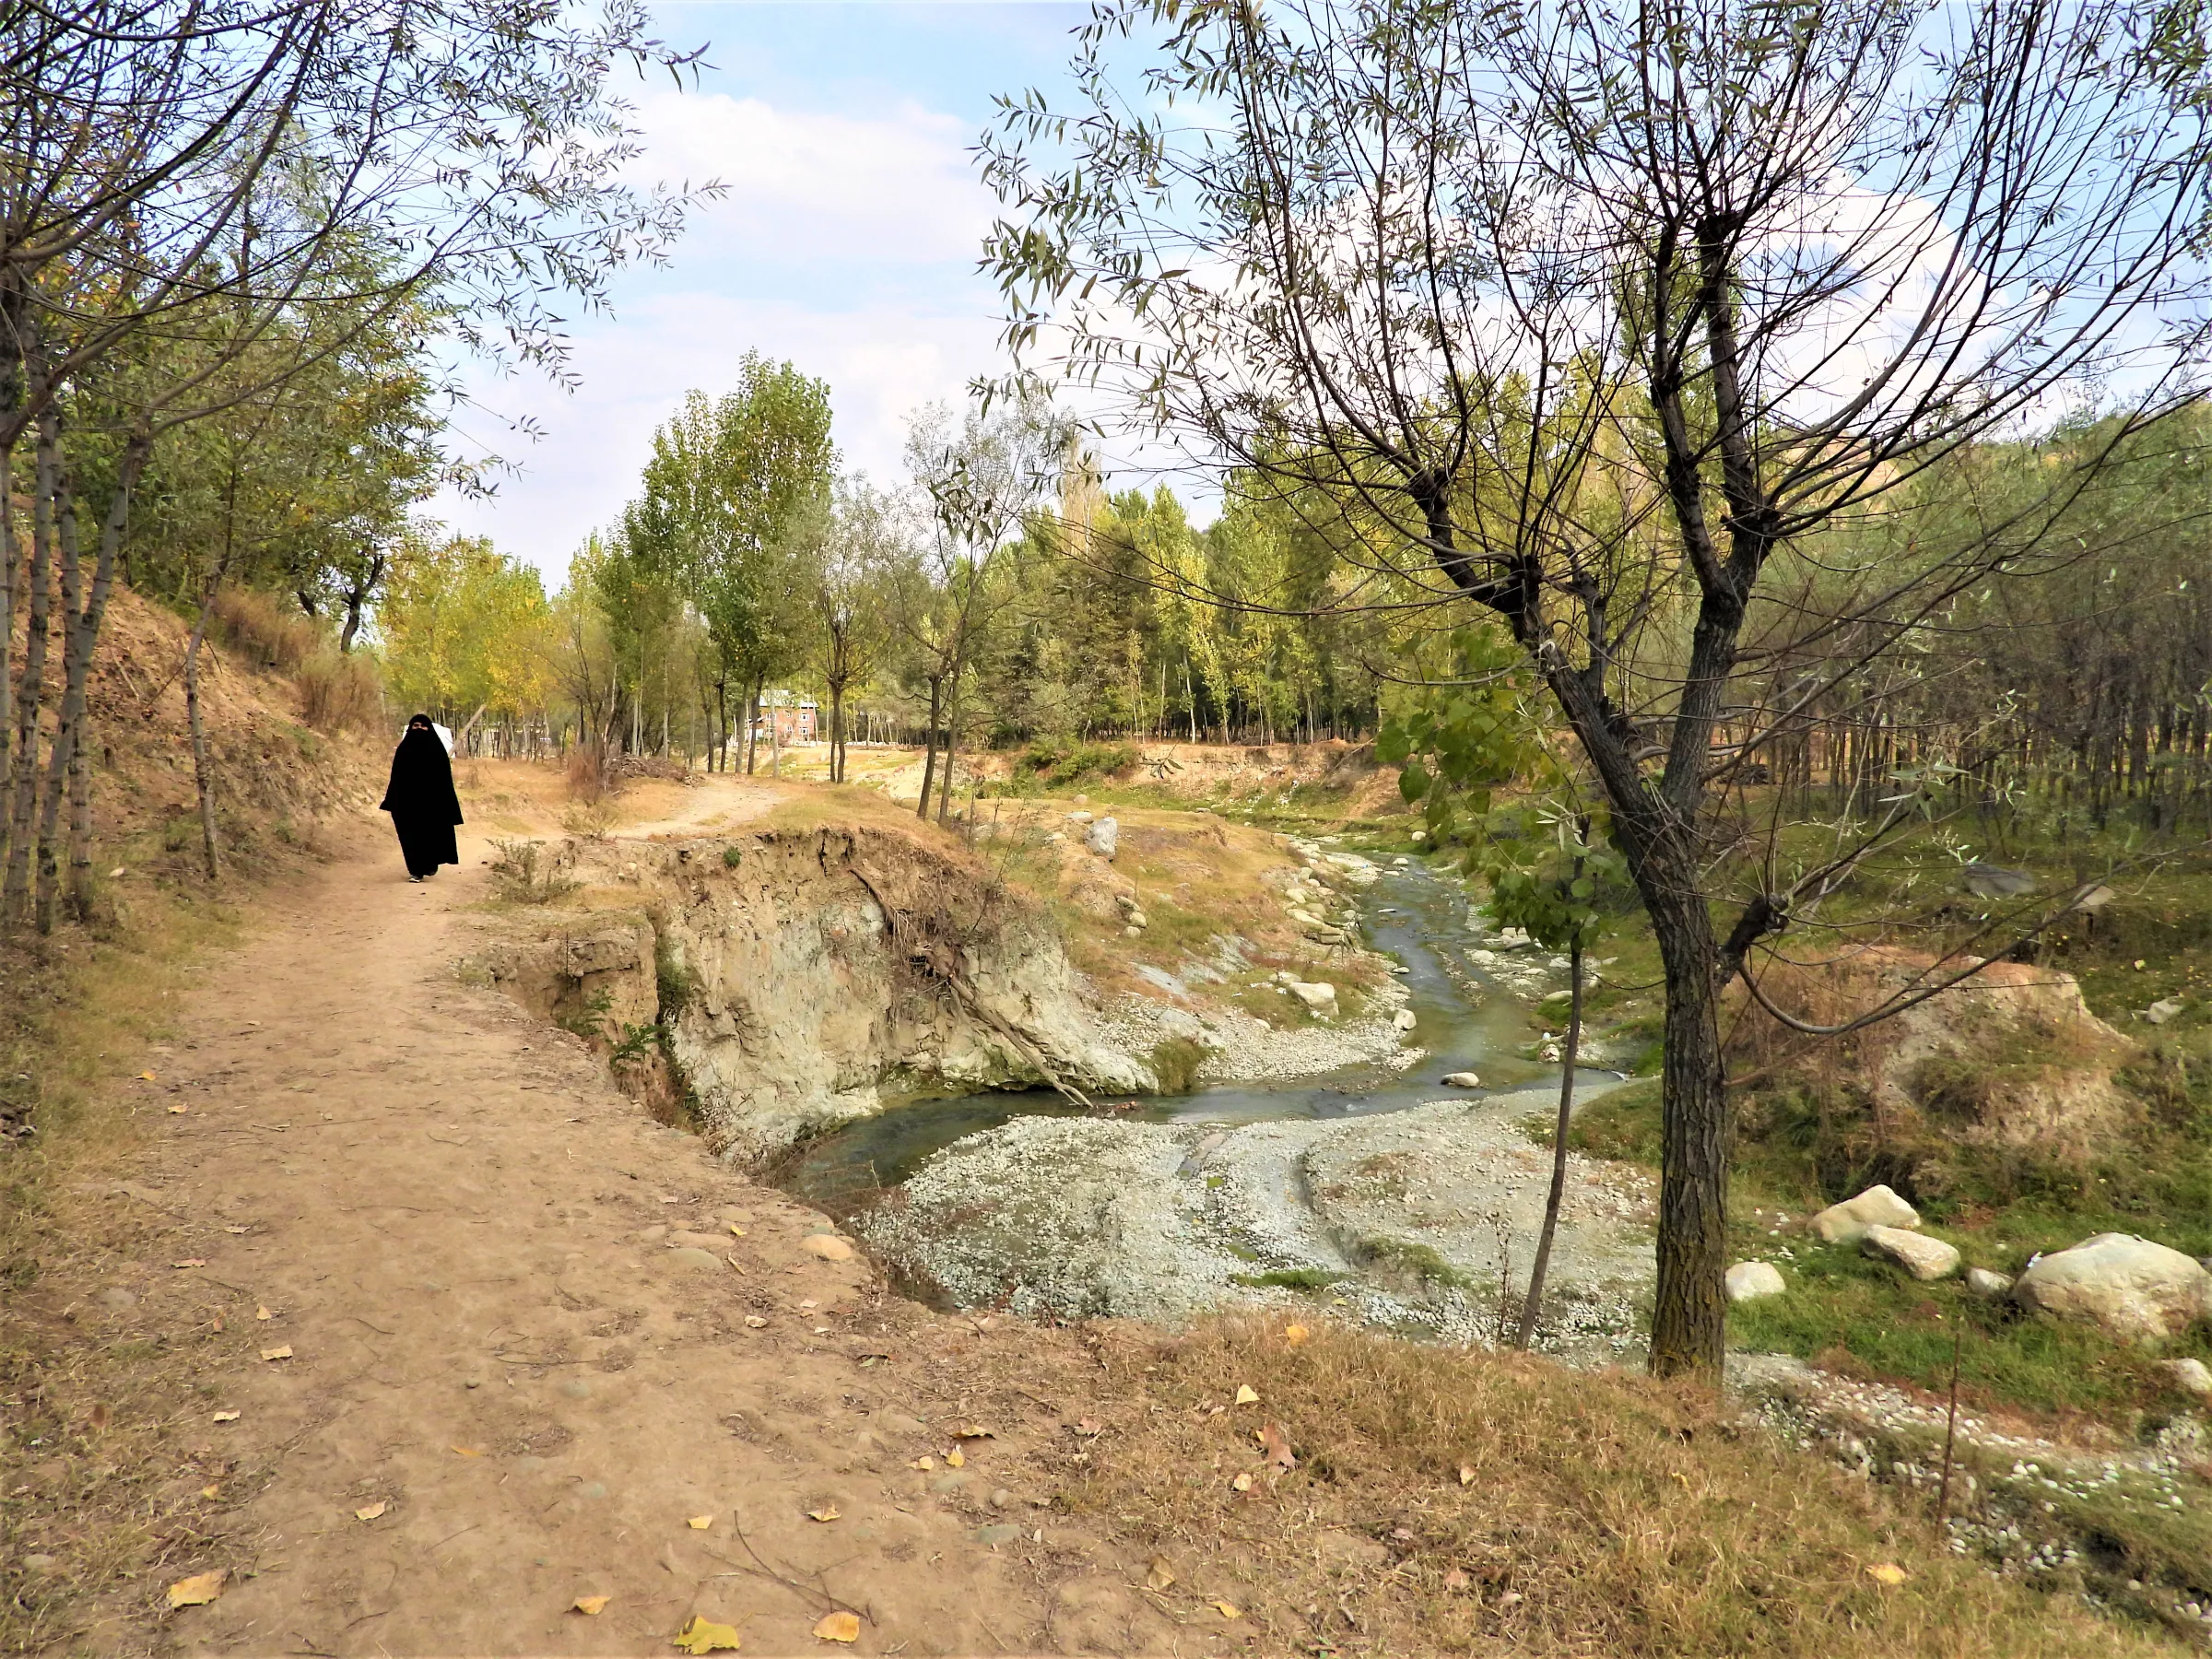 A veiled woman walks on a road damaged by flooding exacerbated by glacial melt, in Kashmir's Chendargund village, India, October 12, 2022